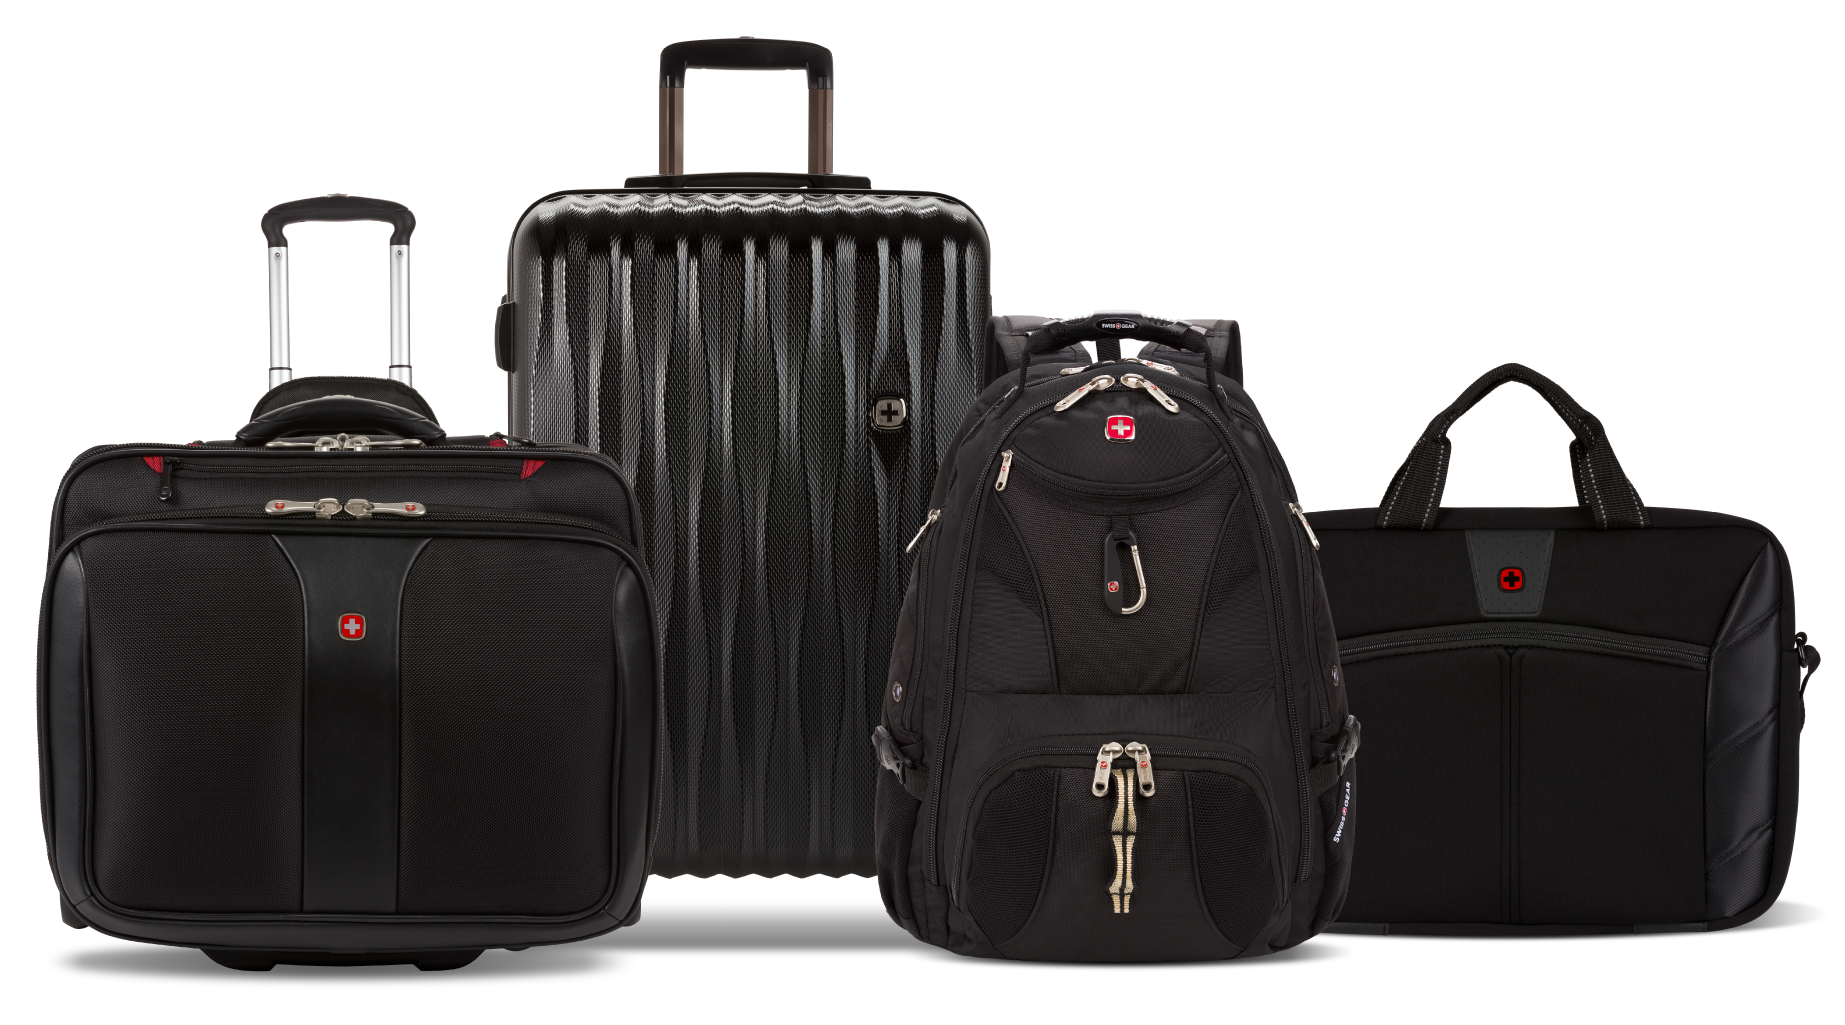 Introducing Wenger Travel Products